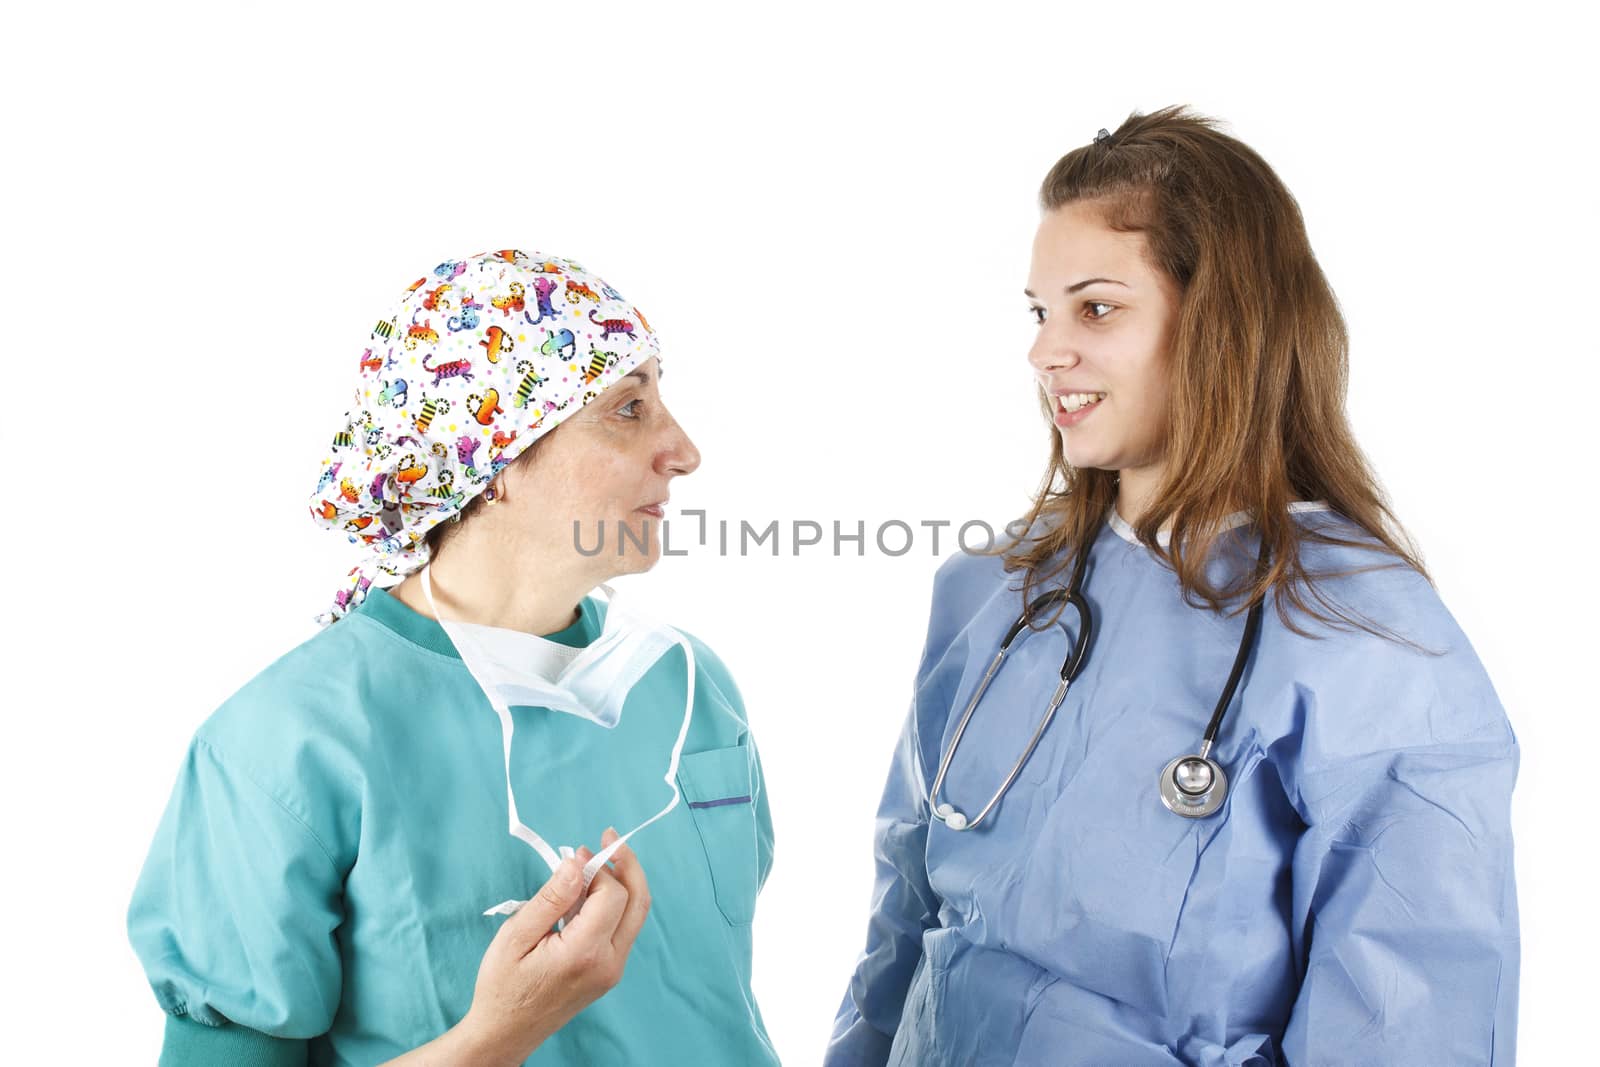 Surgeon and doctor speaking to each other. Isolated on white background.